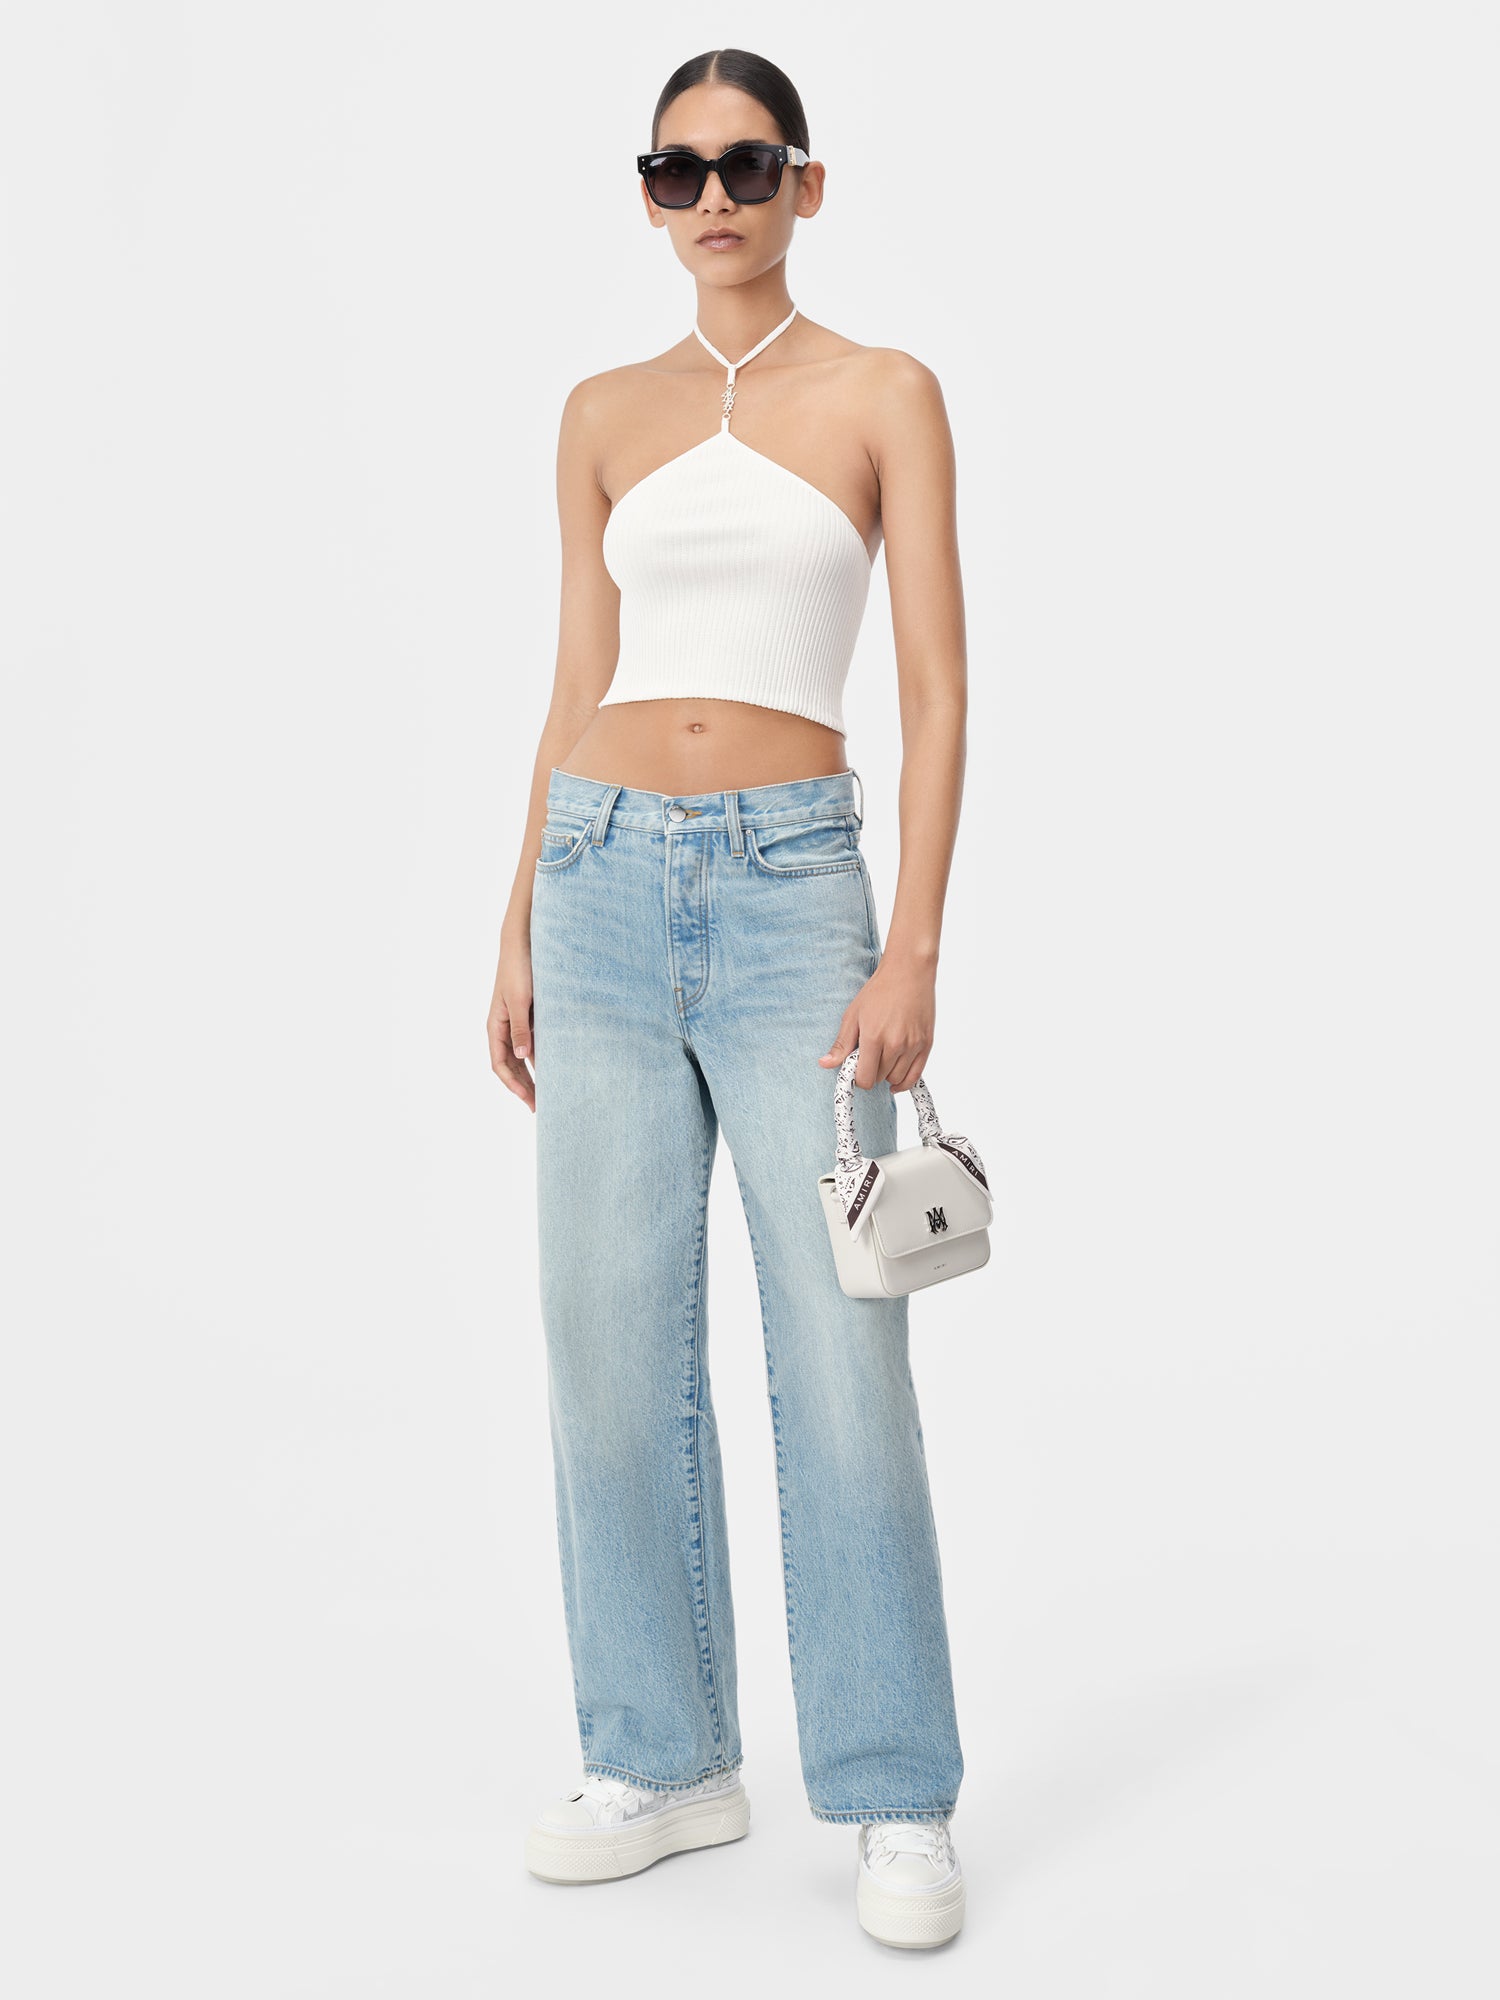 Product WOMEN - WOMEN'S AMIRI STACKED HALTER TOP - Alabaster featured image